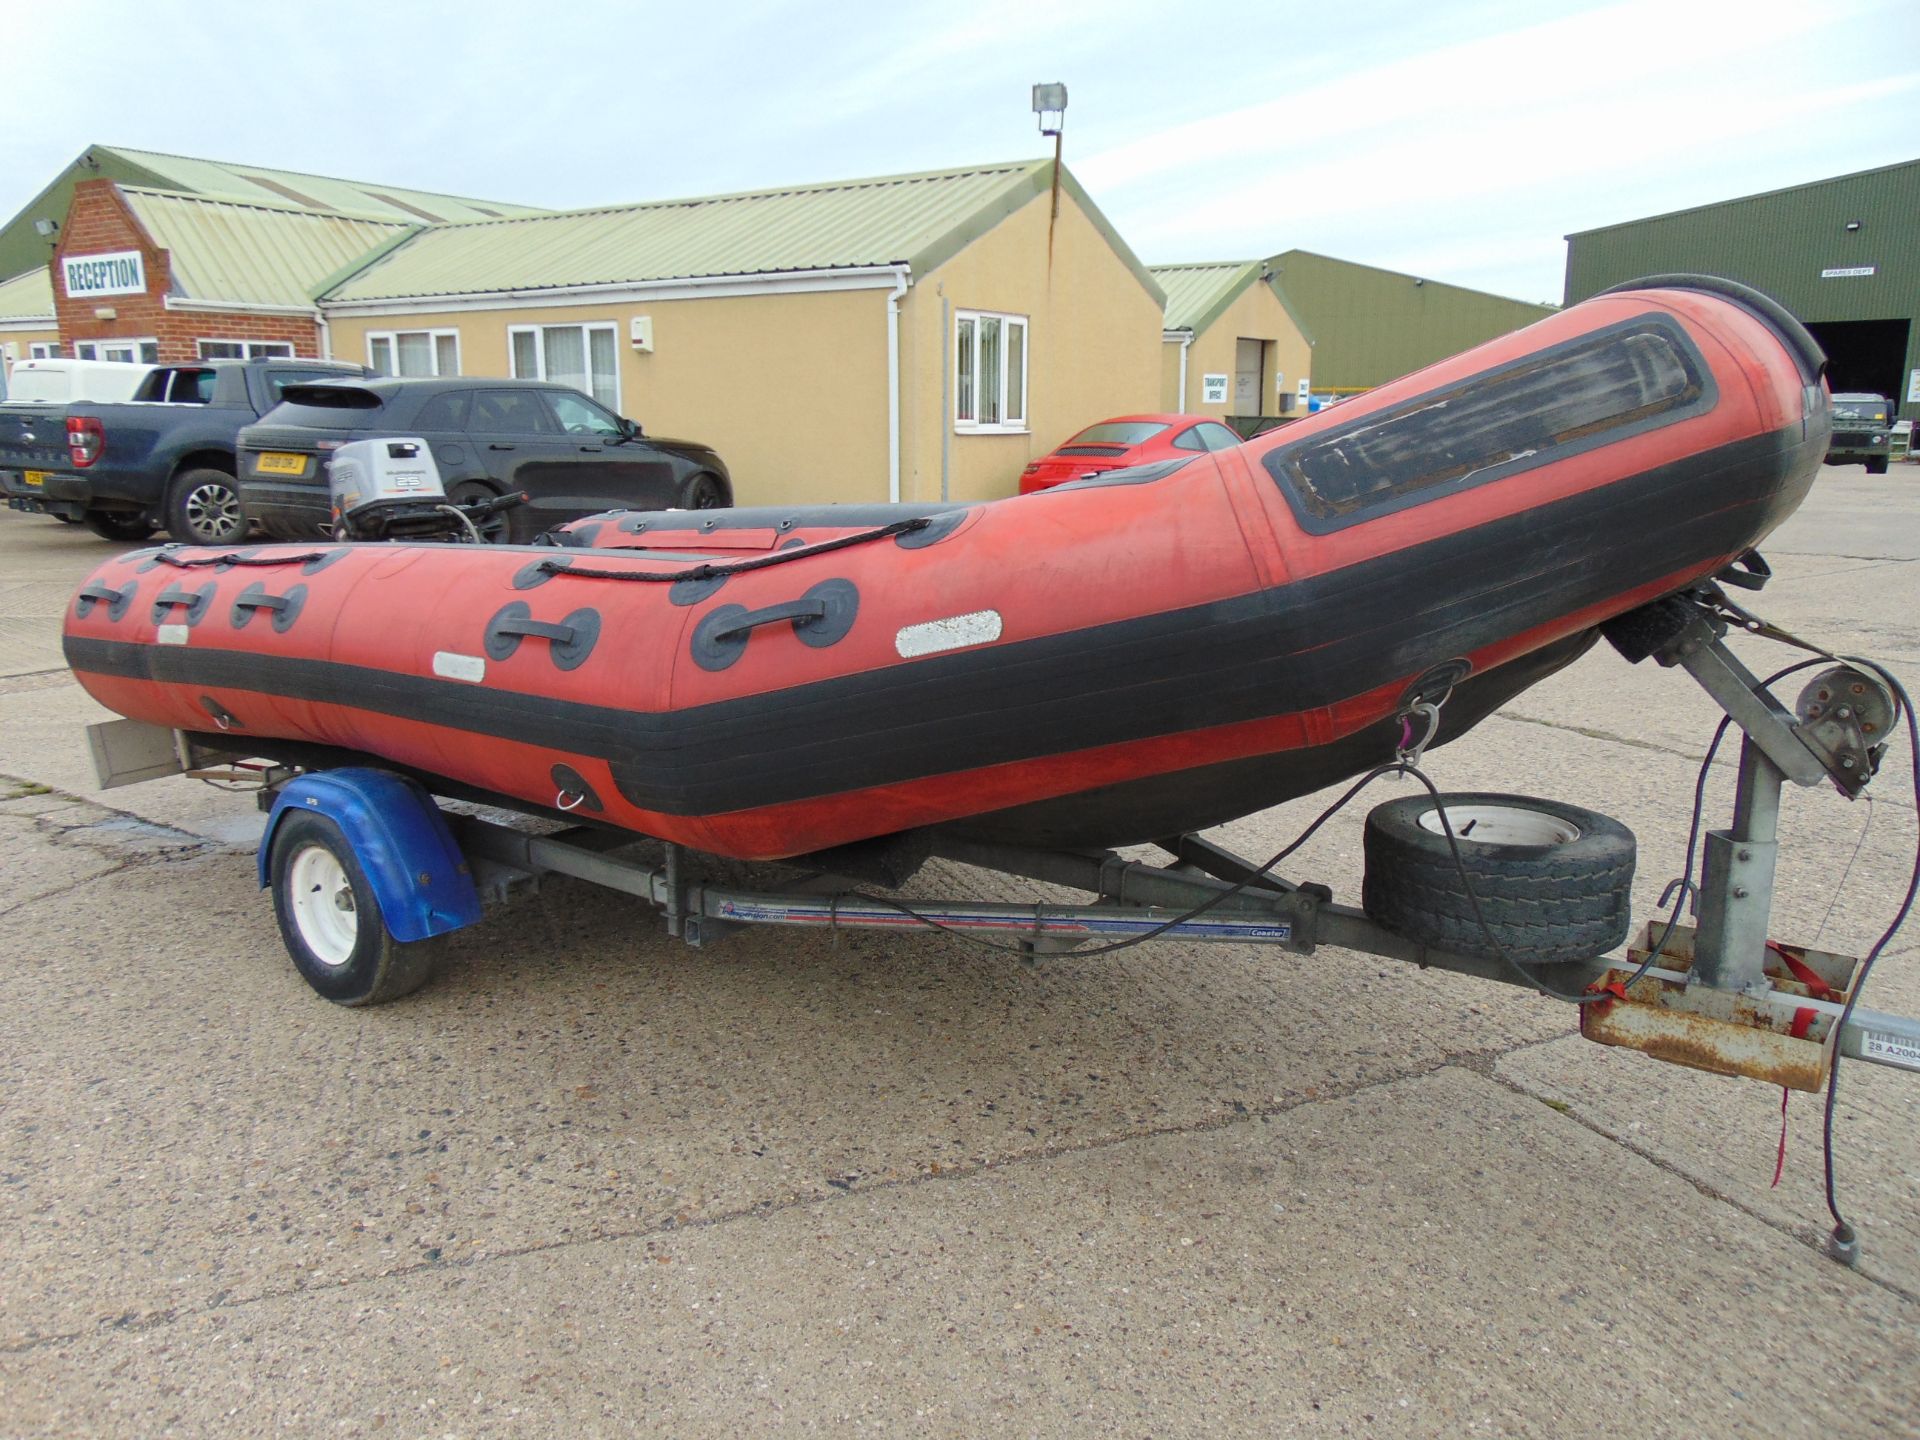 Eurocraft 440 Inflatable Rib C/W Mariner Outboard Motor and Transportation Trailer - Image 9 of 26